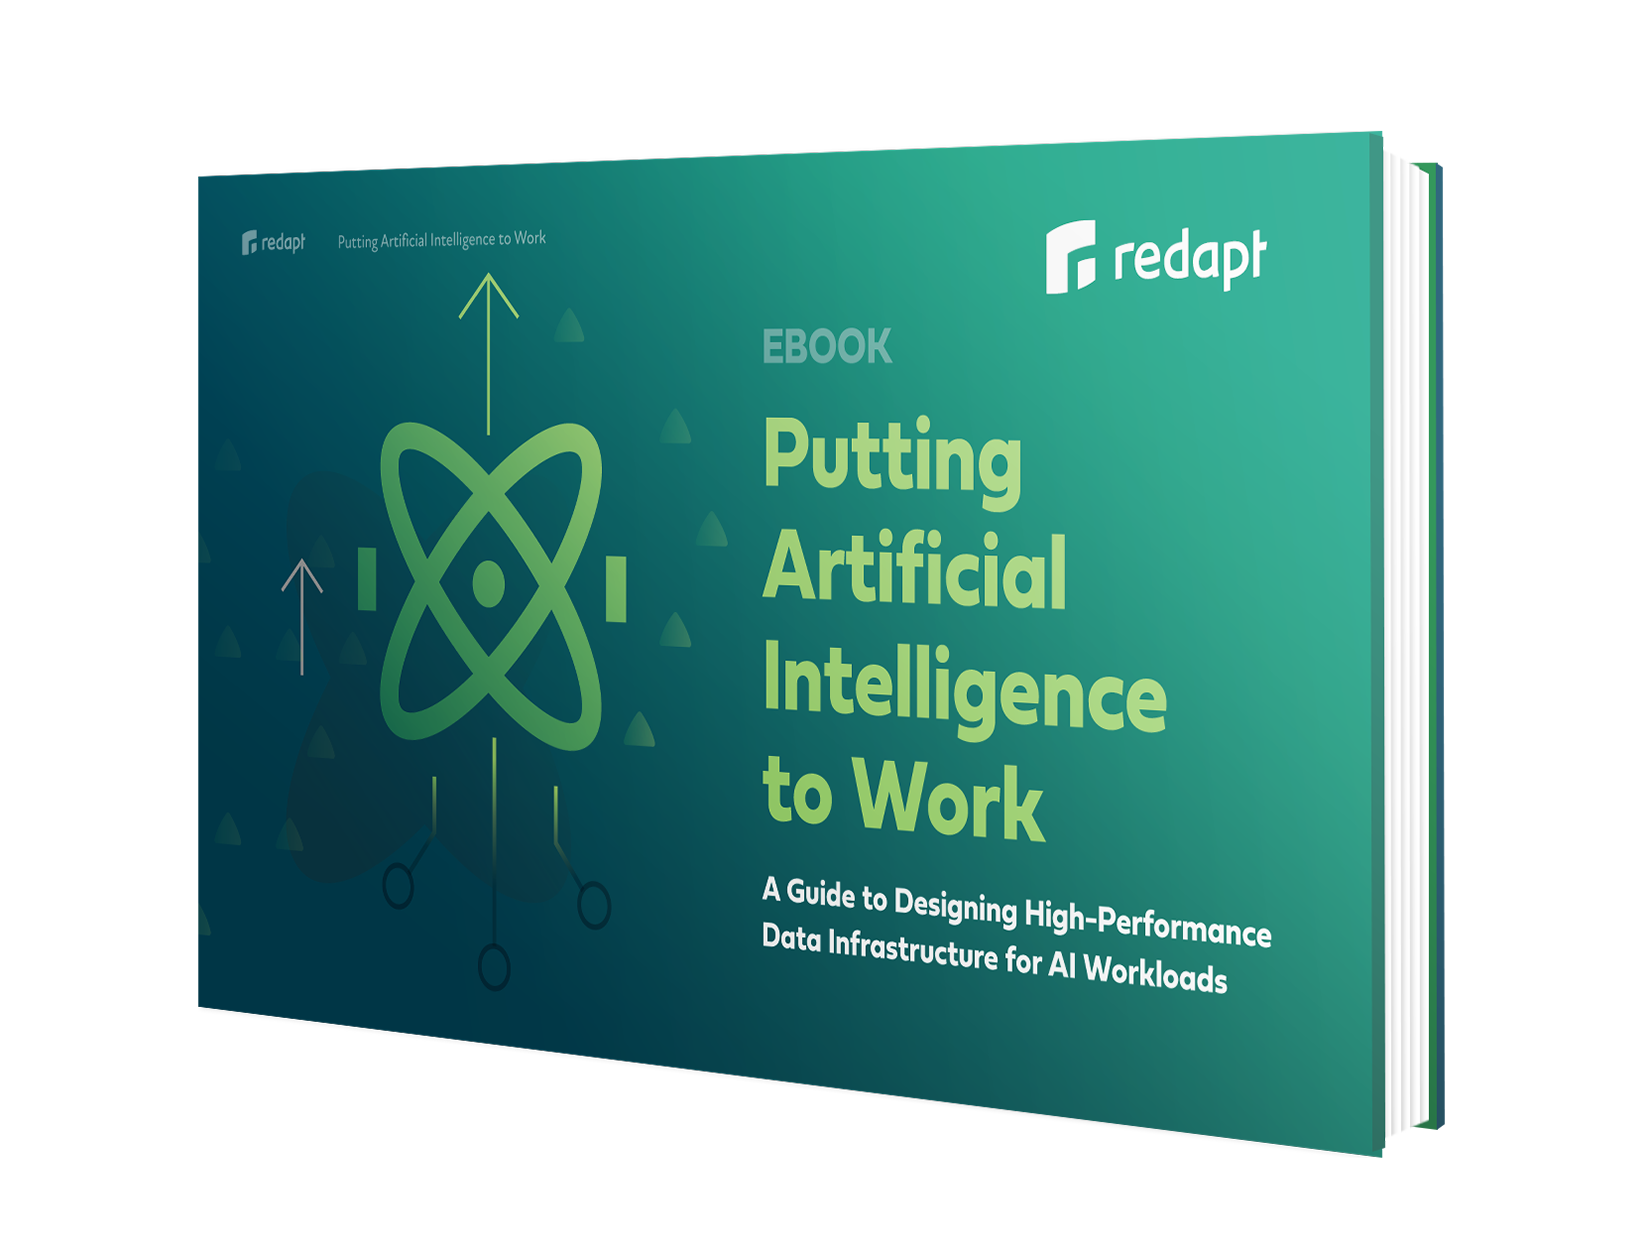 Putting Artificial Intelligence to Work: A Guide to Designing High-Performance Datacenter Infrastructure for AI Workloads